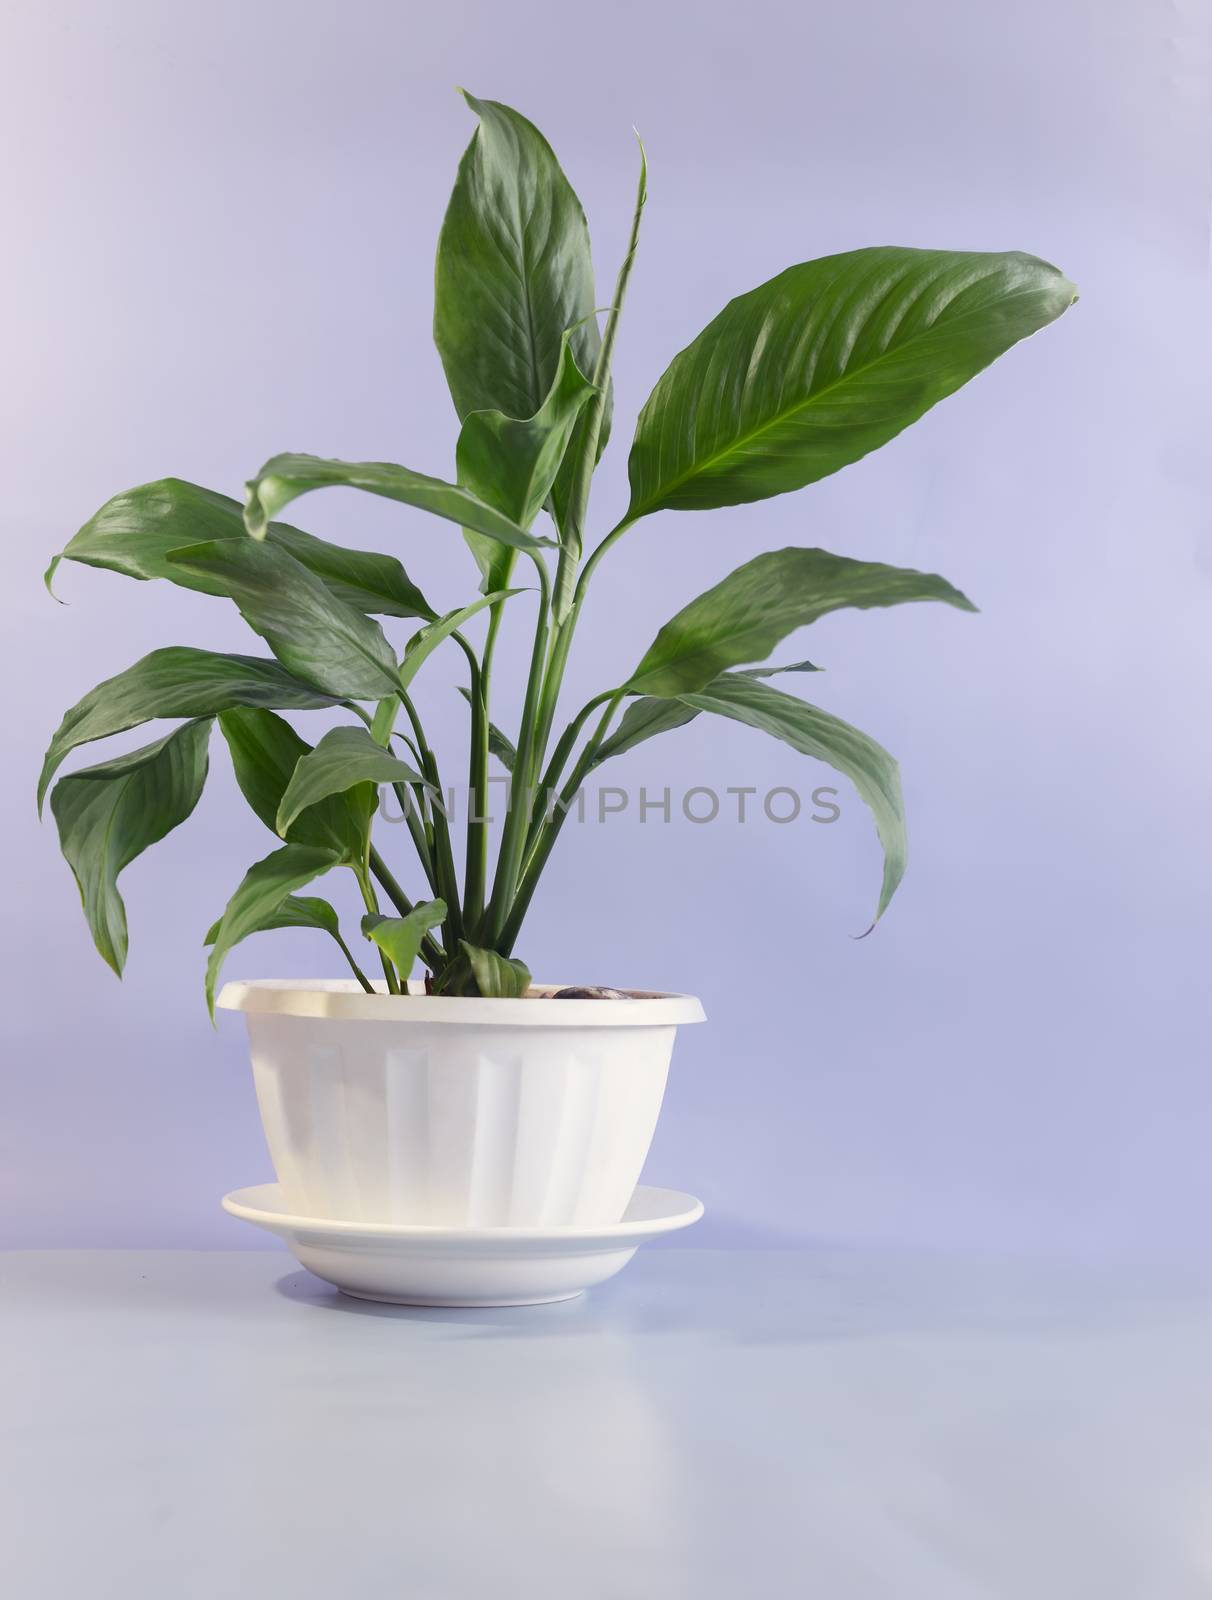 On the table in a white flower pot grows a beautiful indoor flower Spathiphyllum